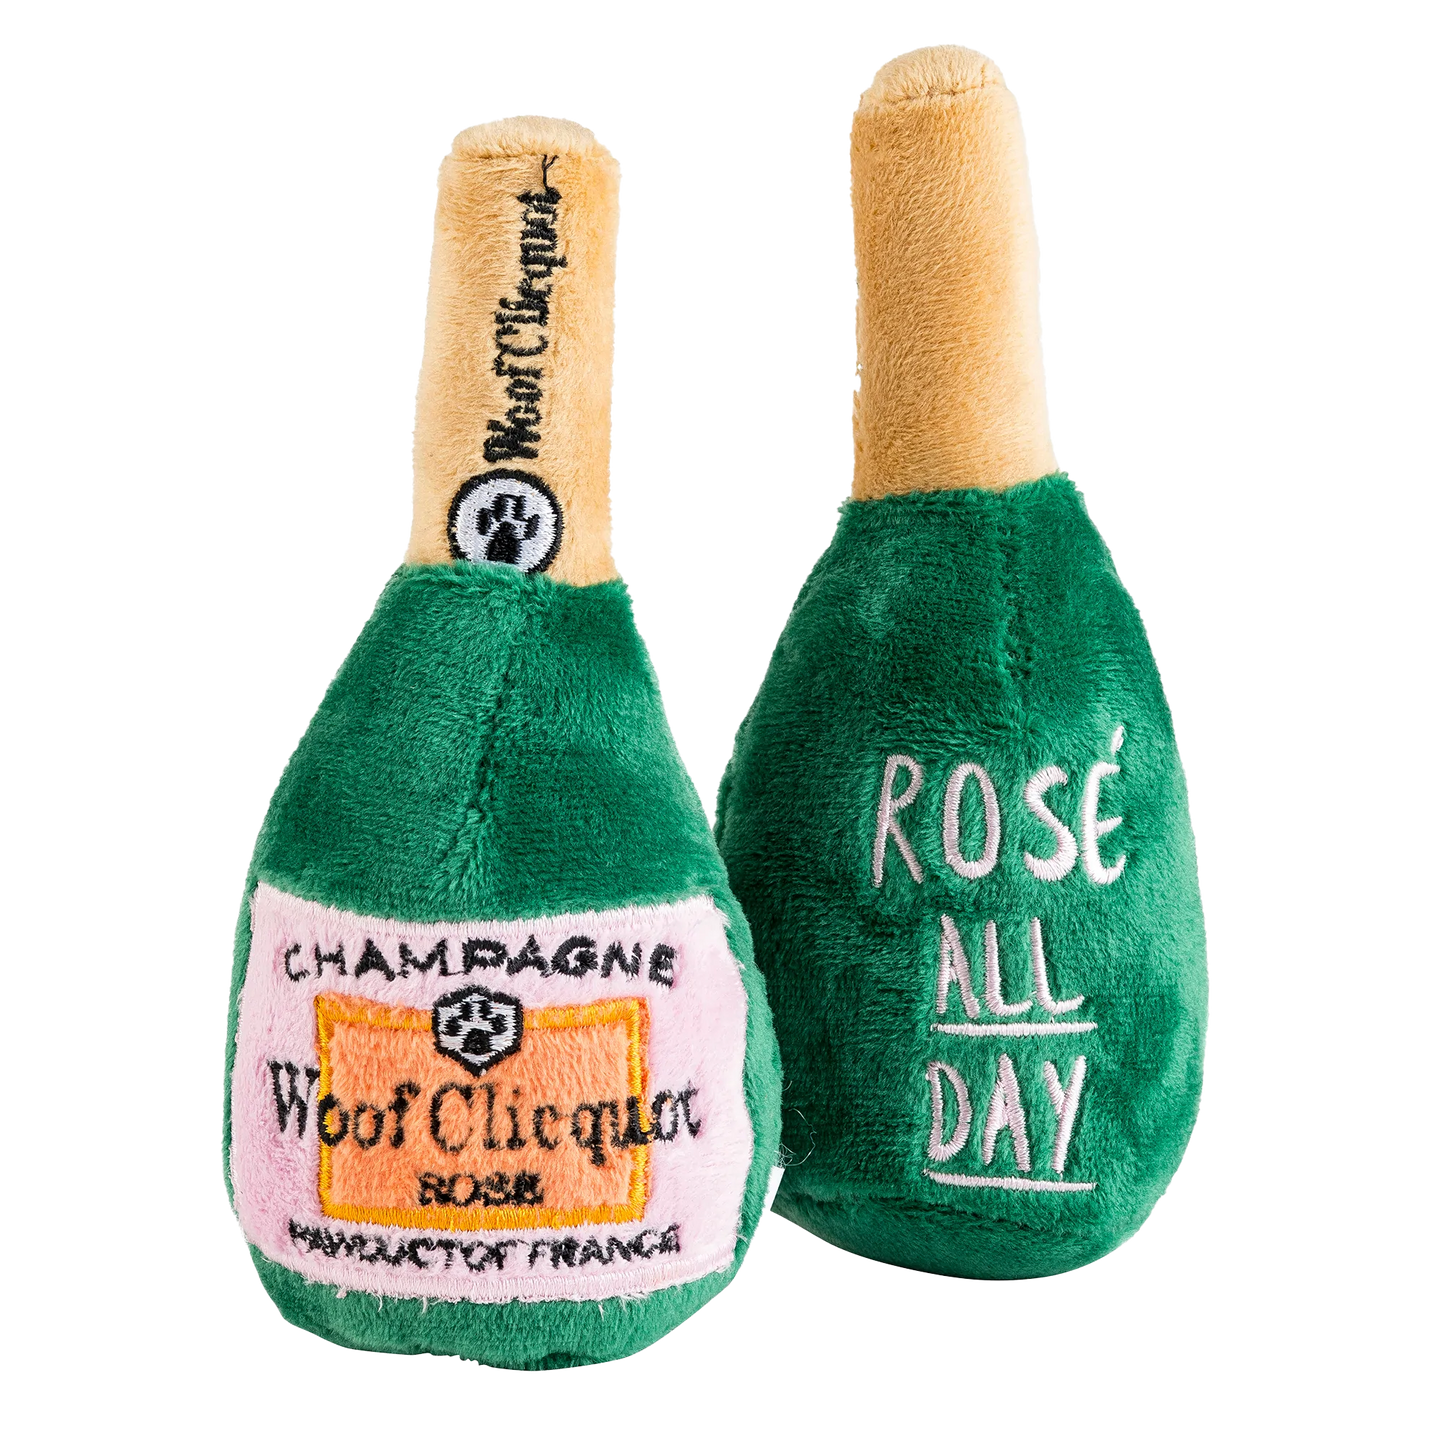 Woof Clicquot Rose' Champagne Bottle - Small